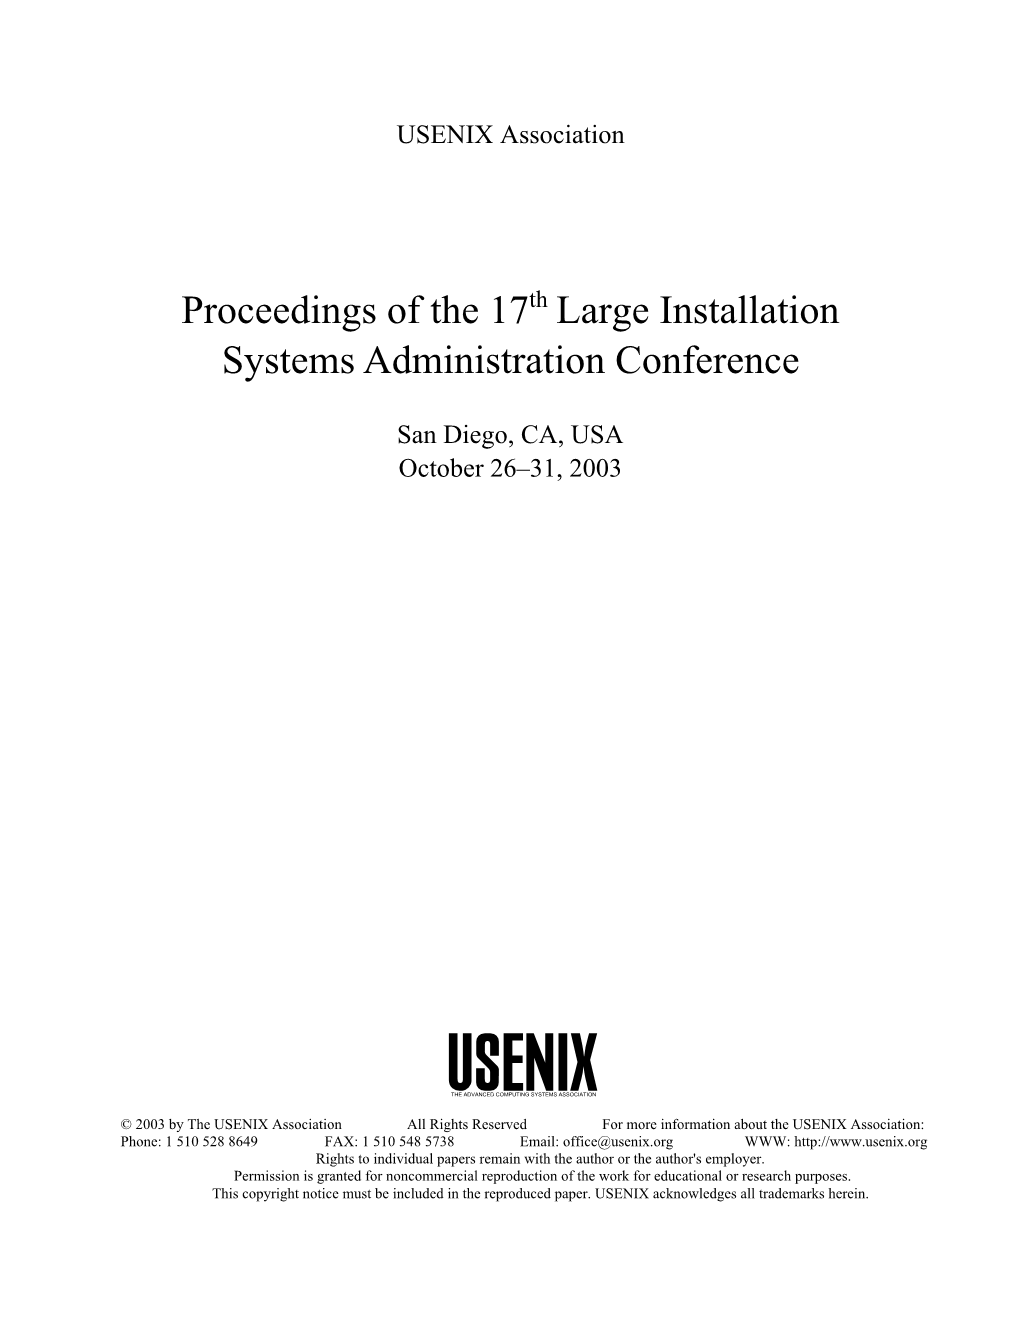 Proceedings of the 17 Large Installation Systems Administration